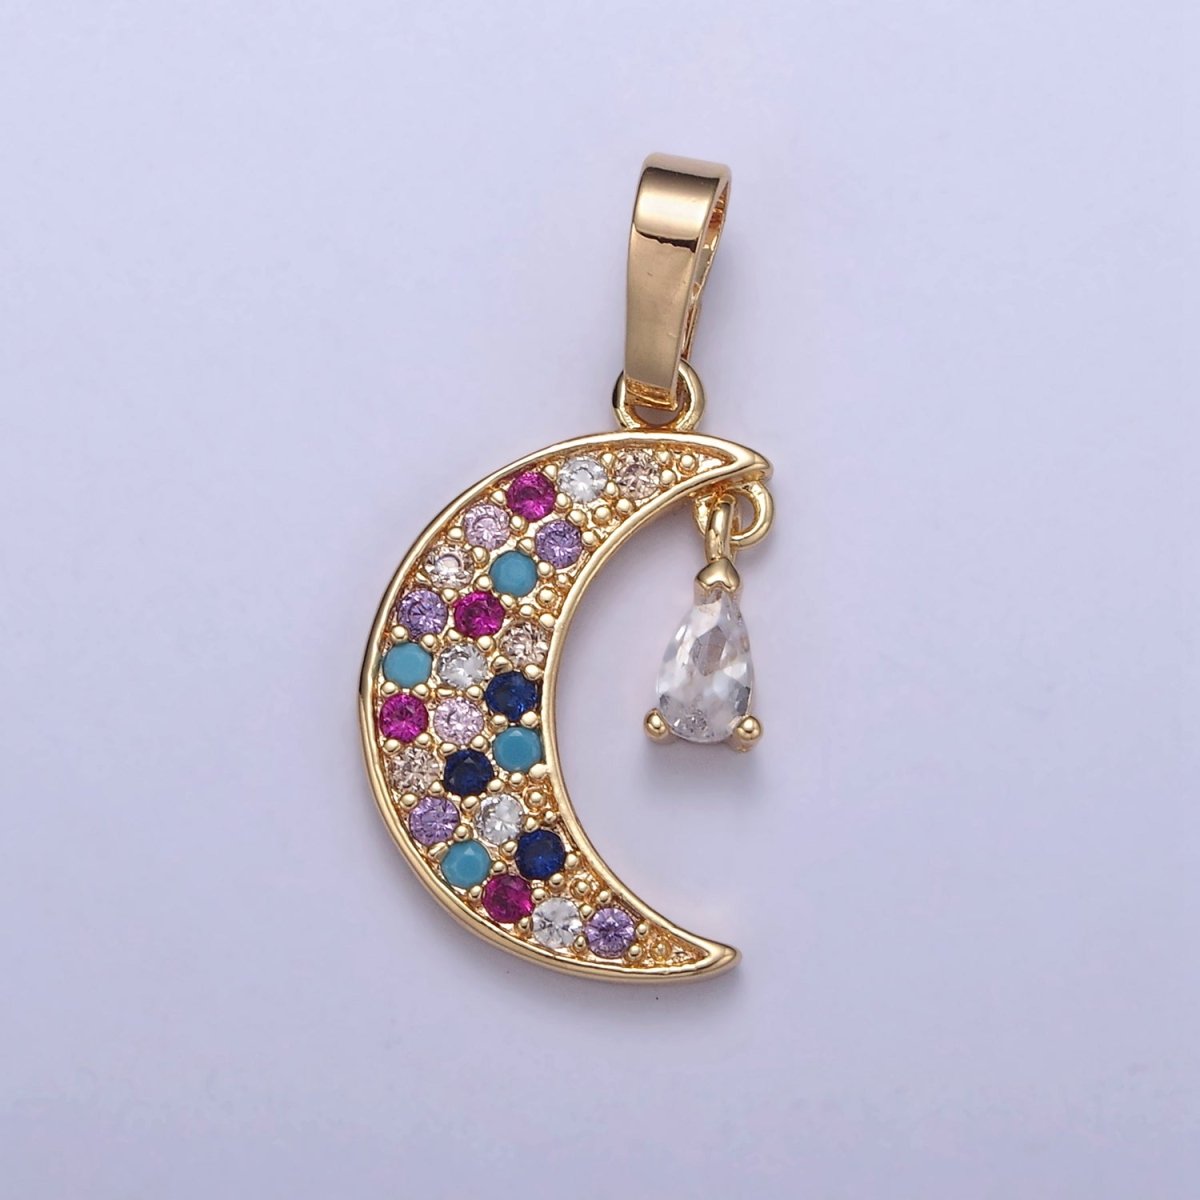 Dainty Crescent Moon Pendant with Multi Color Cz Stone for Celestial Jewelry Making H-548 - DLUXCA